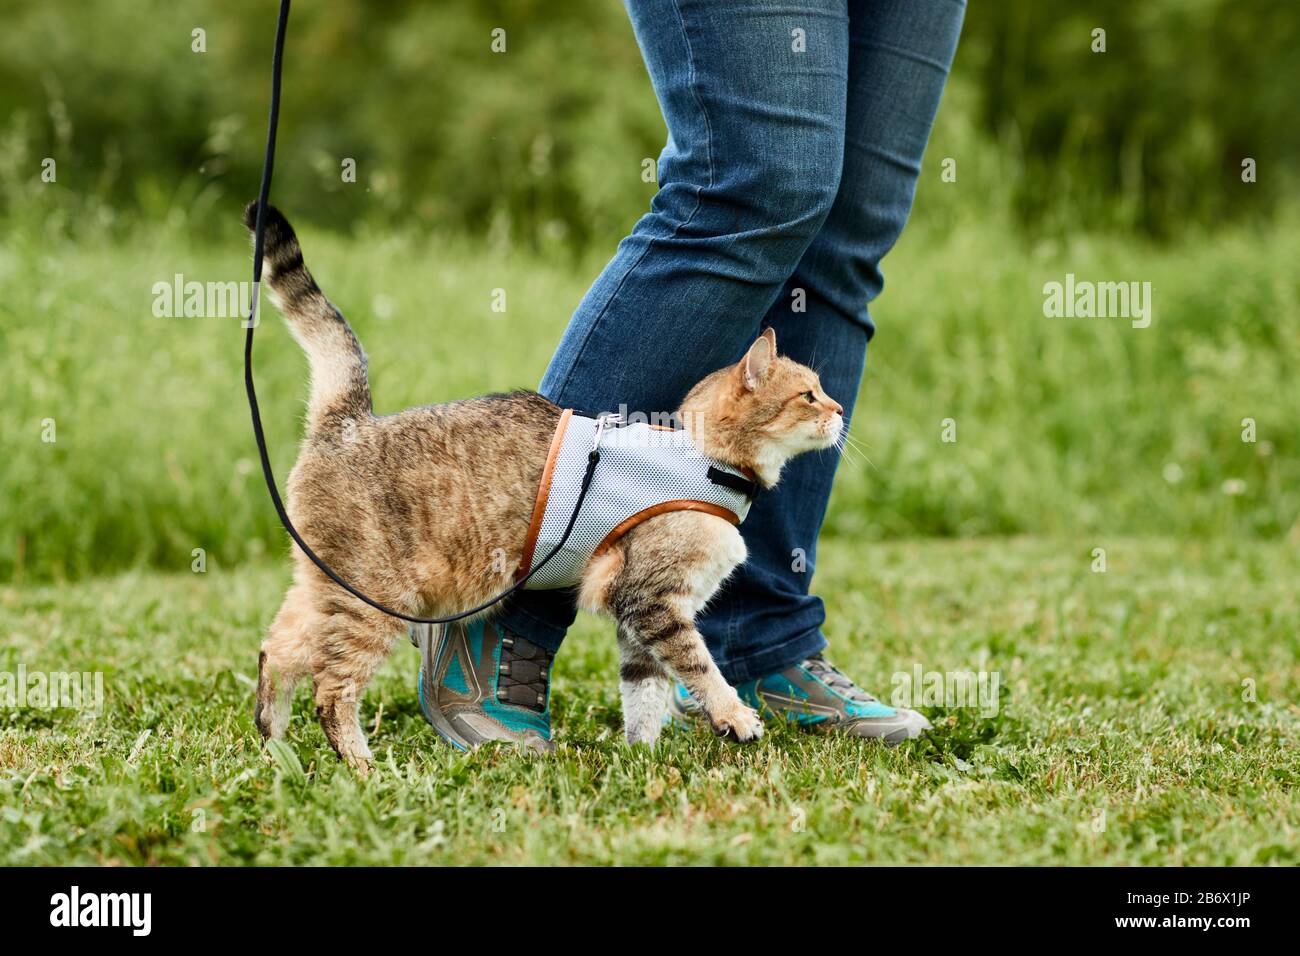 Domestic cat and a person on a walk. The cat with harness and lead. Germany. Stock Photo